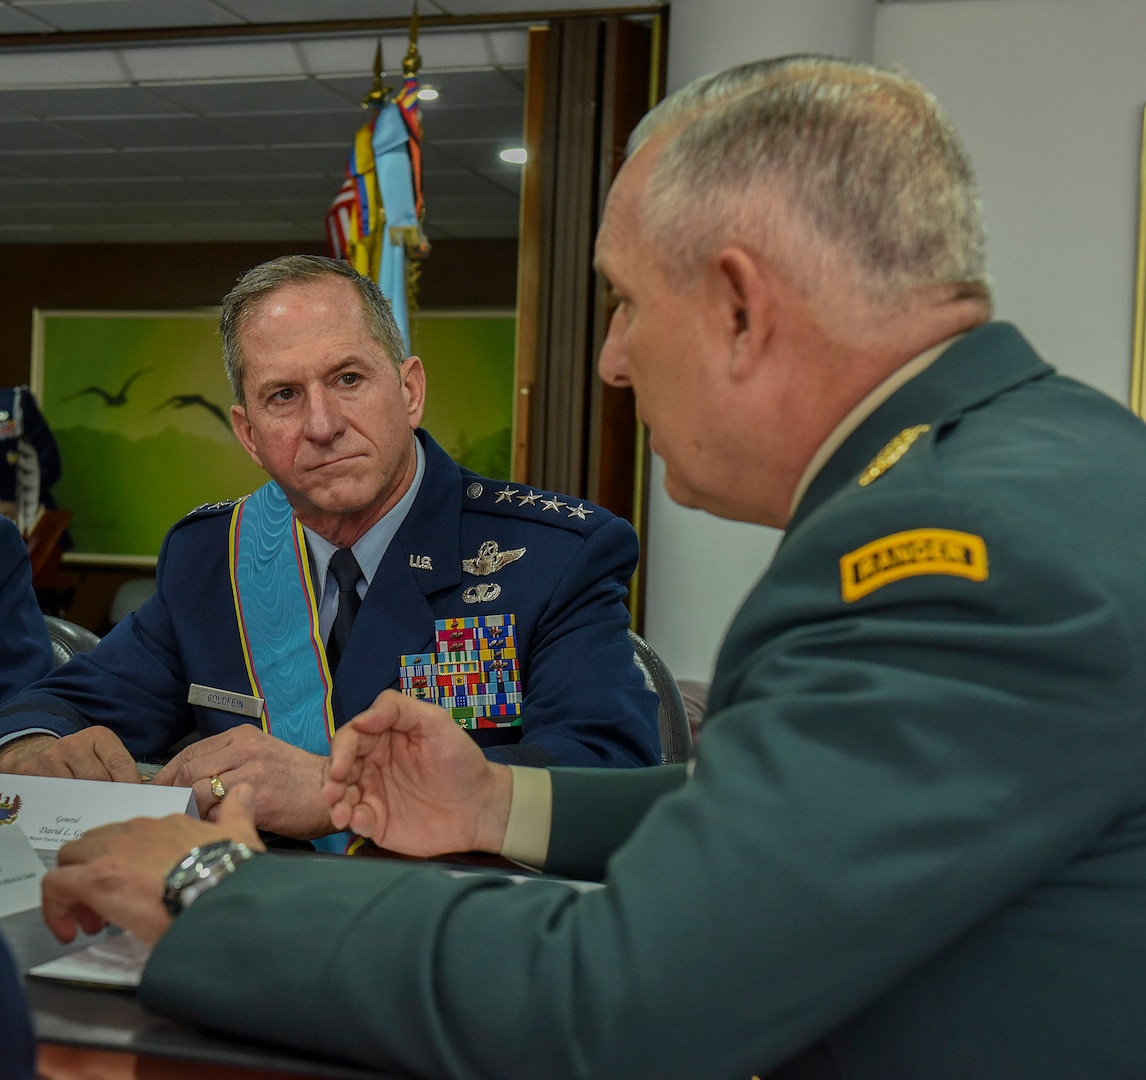 Commander of the Colombian Armed Forces General Alberto José Mejía expresses thanks and support to Air Force Chief of Staff Gen. David L. Goldfein during a meeting between Colombian and U.S. military leaders in Bogota, Colombia, Nov. 15, 2018. By working together with partner nations and regional leaders, the U.S. will achieve effective solutions to common challenges. (U.S. Air Force photo by Tech Sgt. Anthony Nelson Jr.)